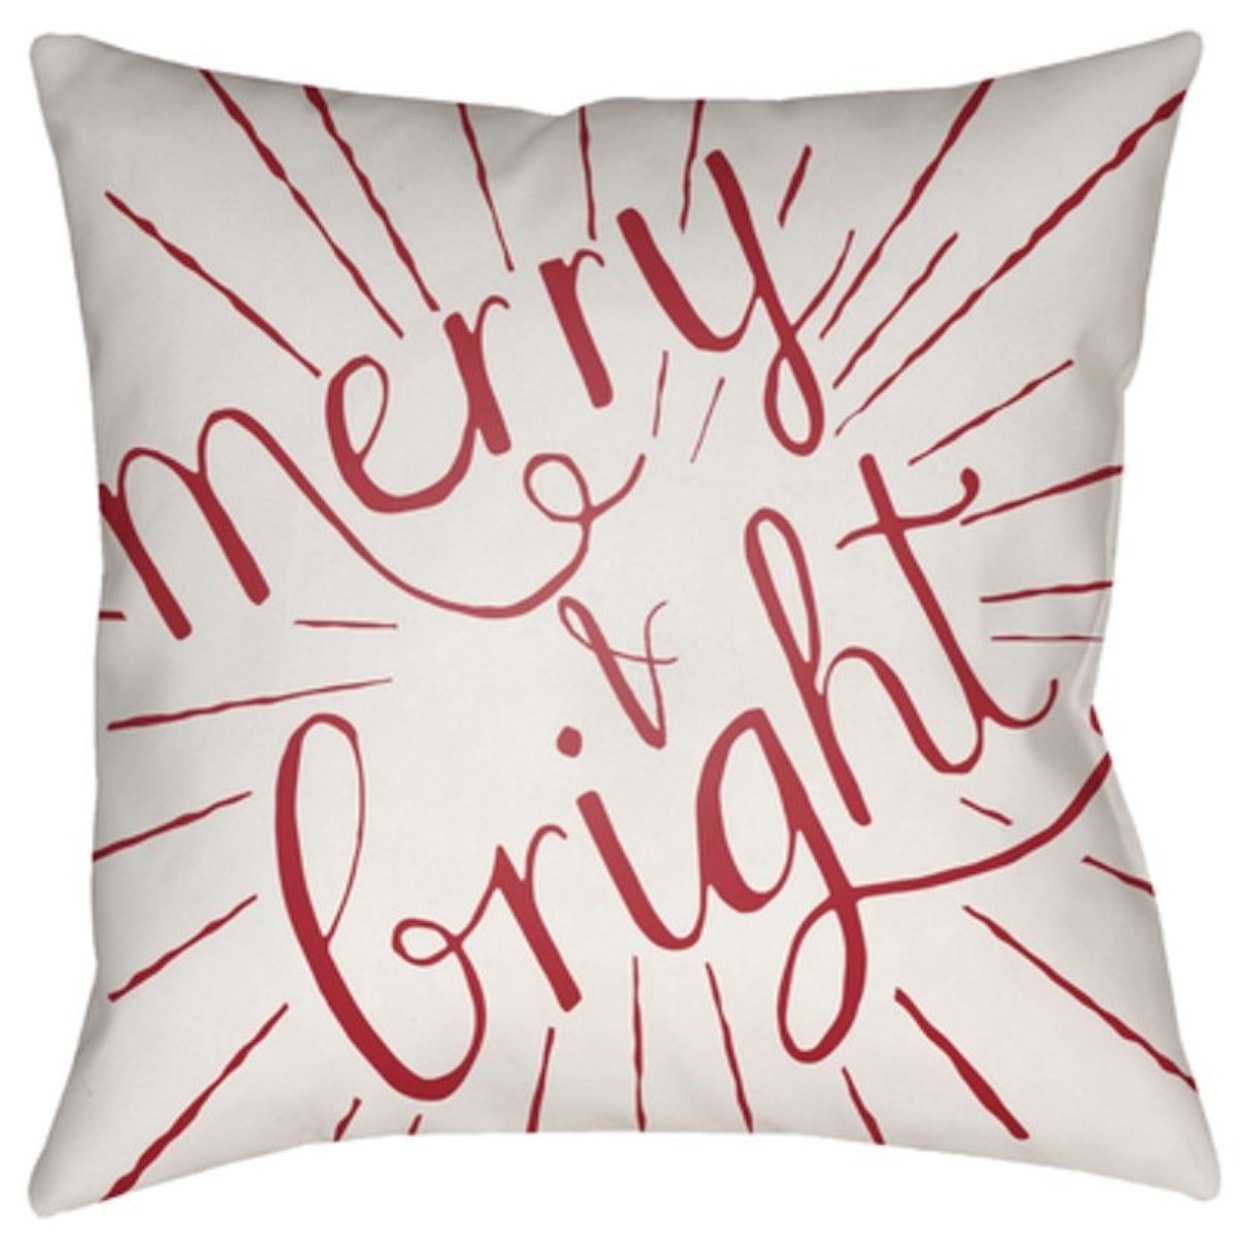 Surya Merry and Bright Pillow